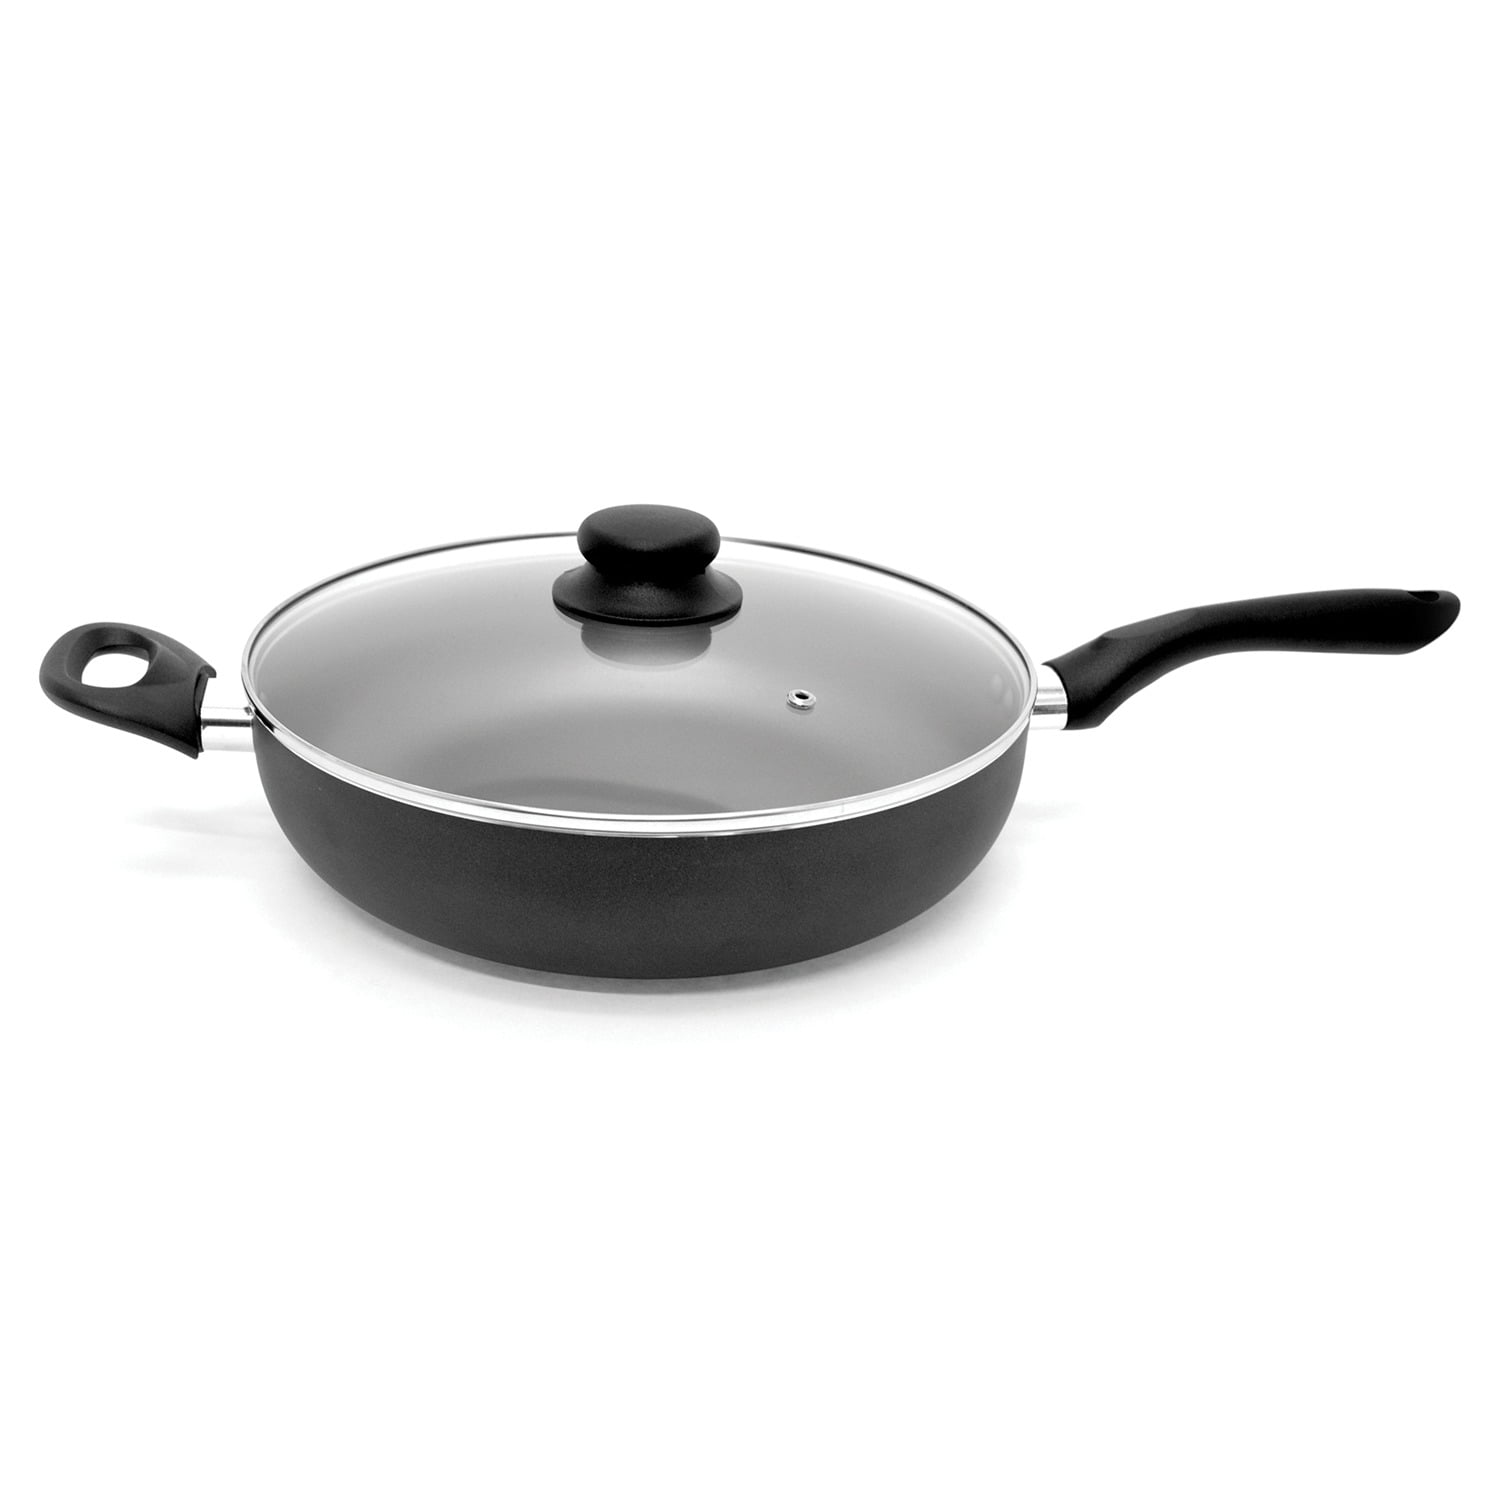  frök All-In-One Non-Stick Fry Pan Meets Wok with Lid, 11-Inch,  Black & Gold : Industrial & Scientific